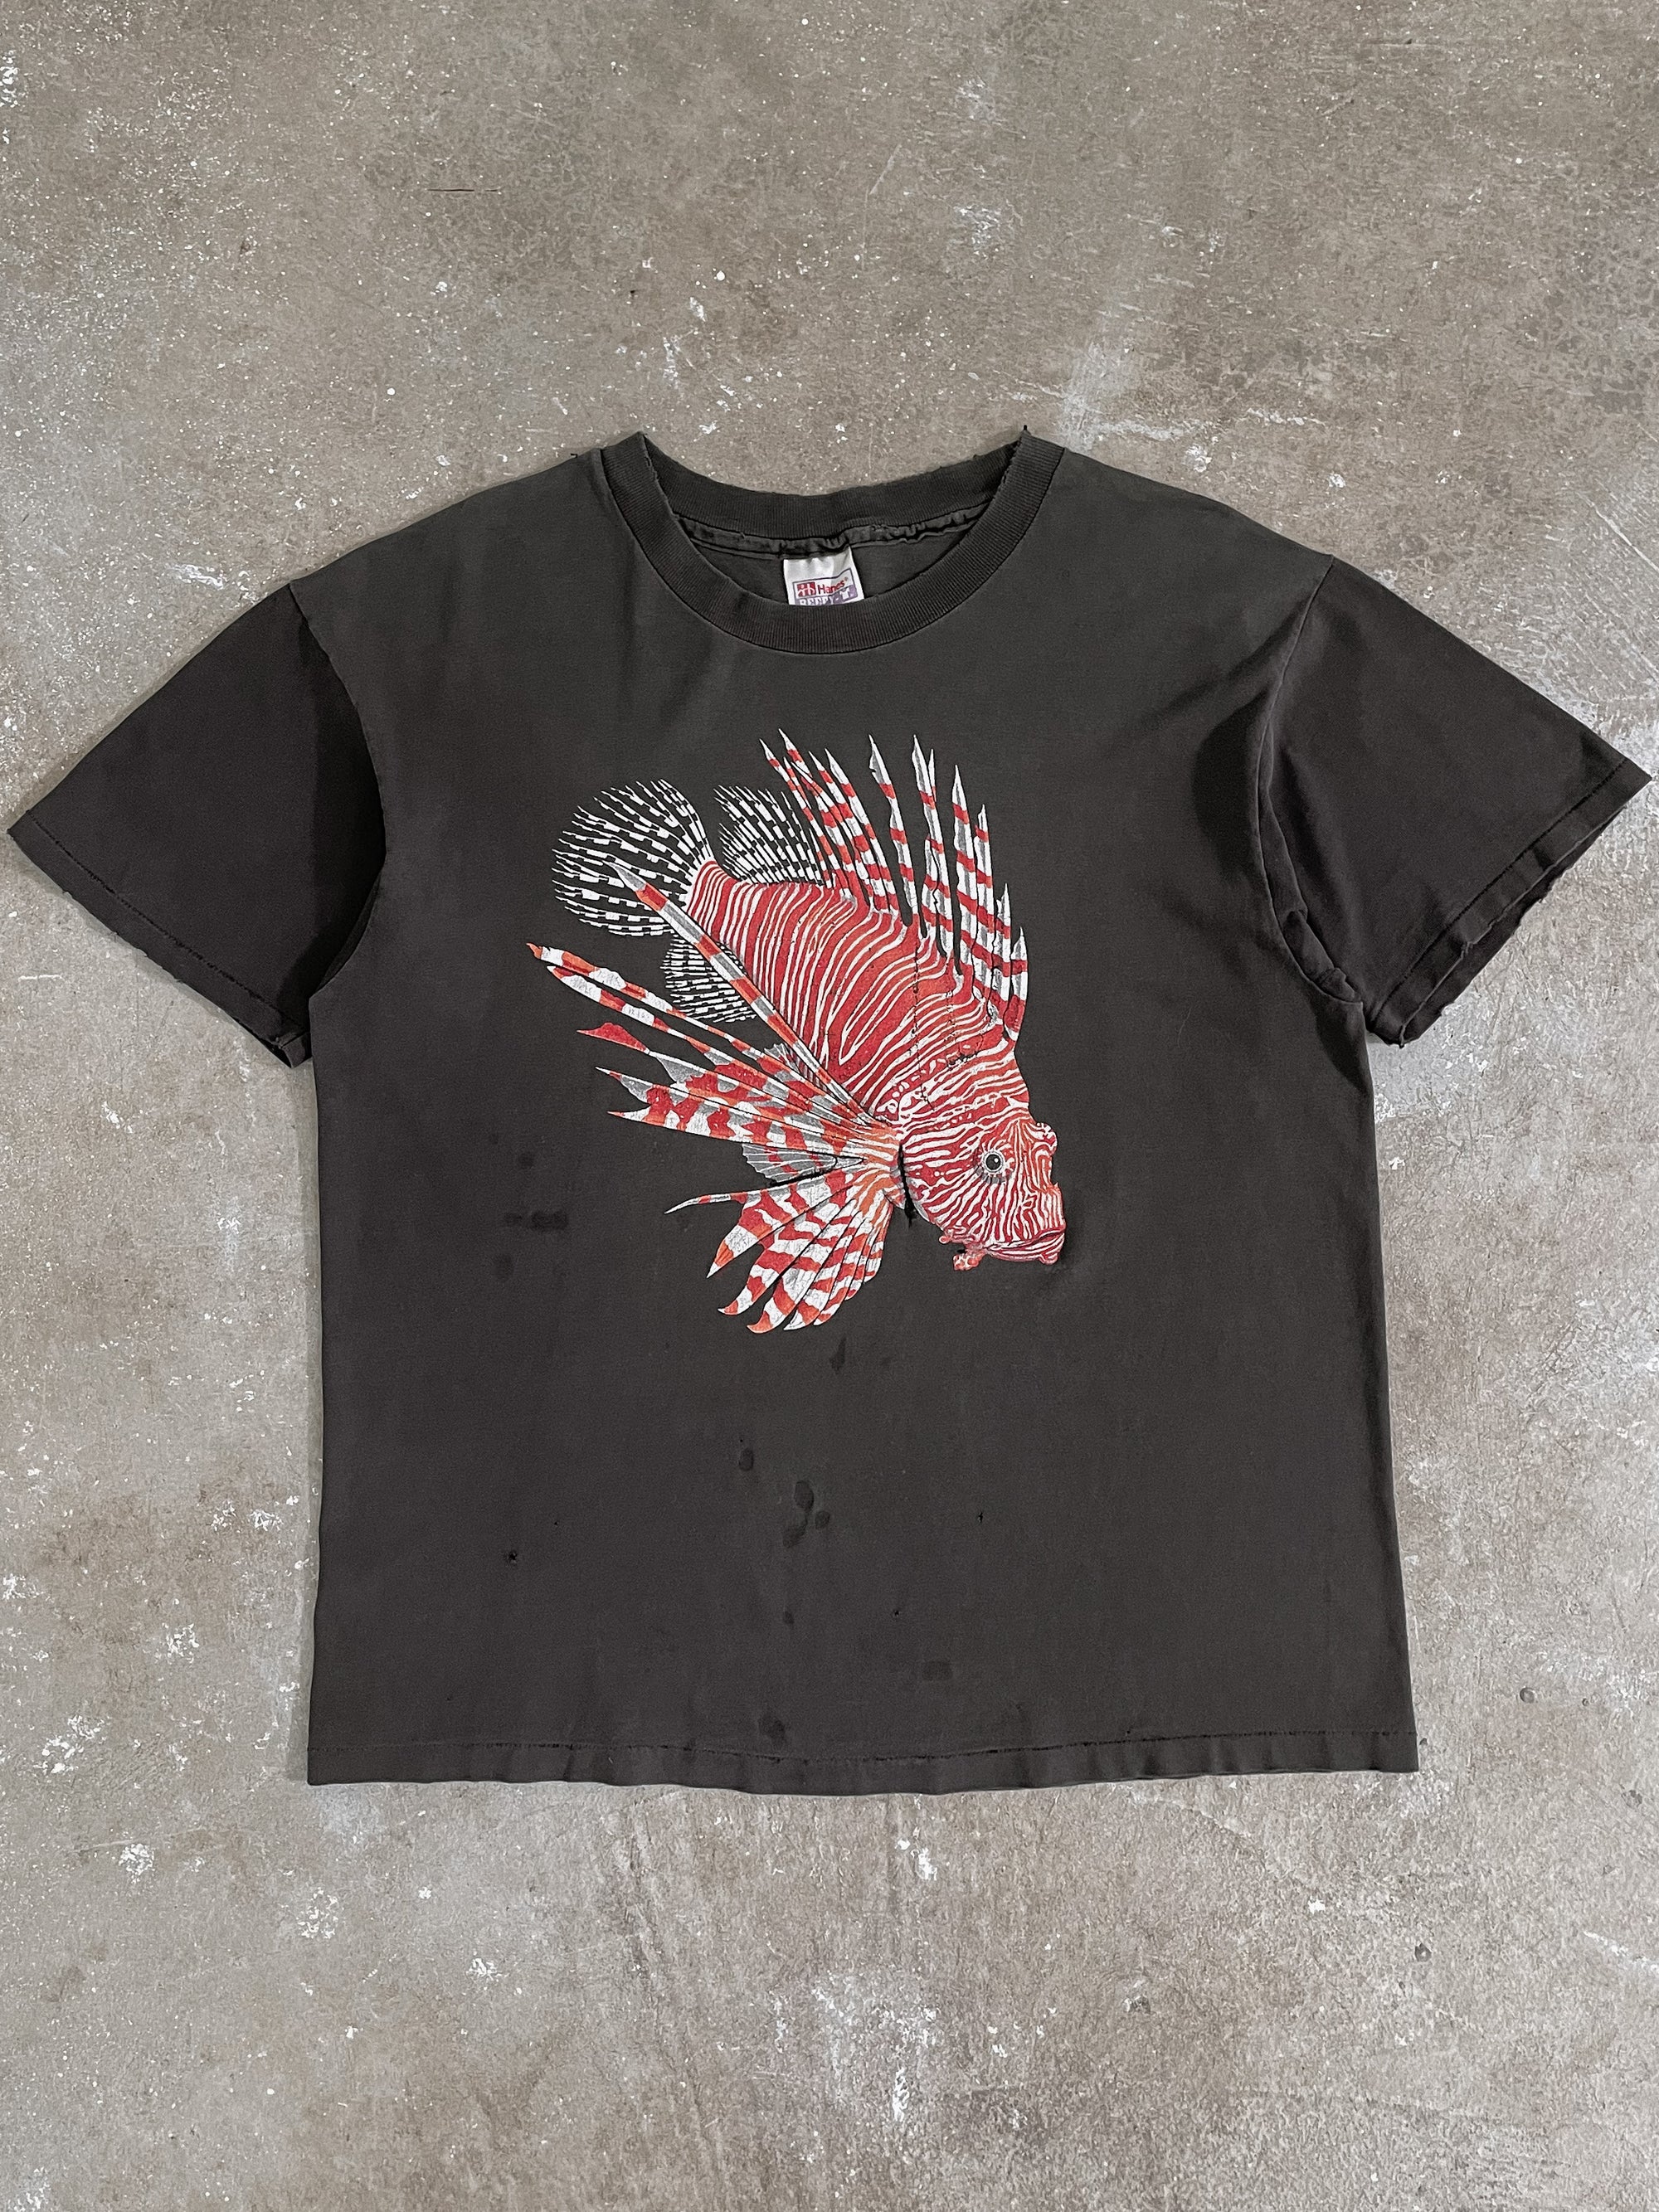 1990s “Lion Fish” Faded Single Stitched Tee (L)